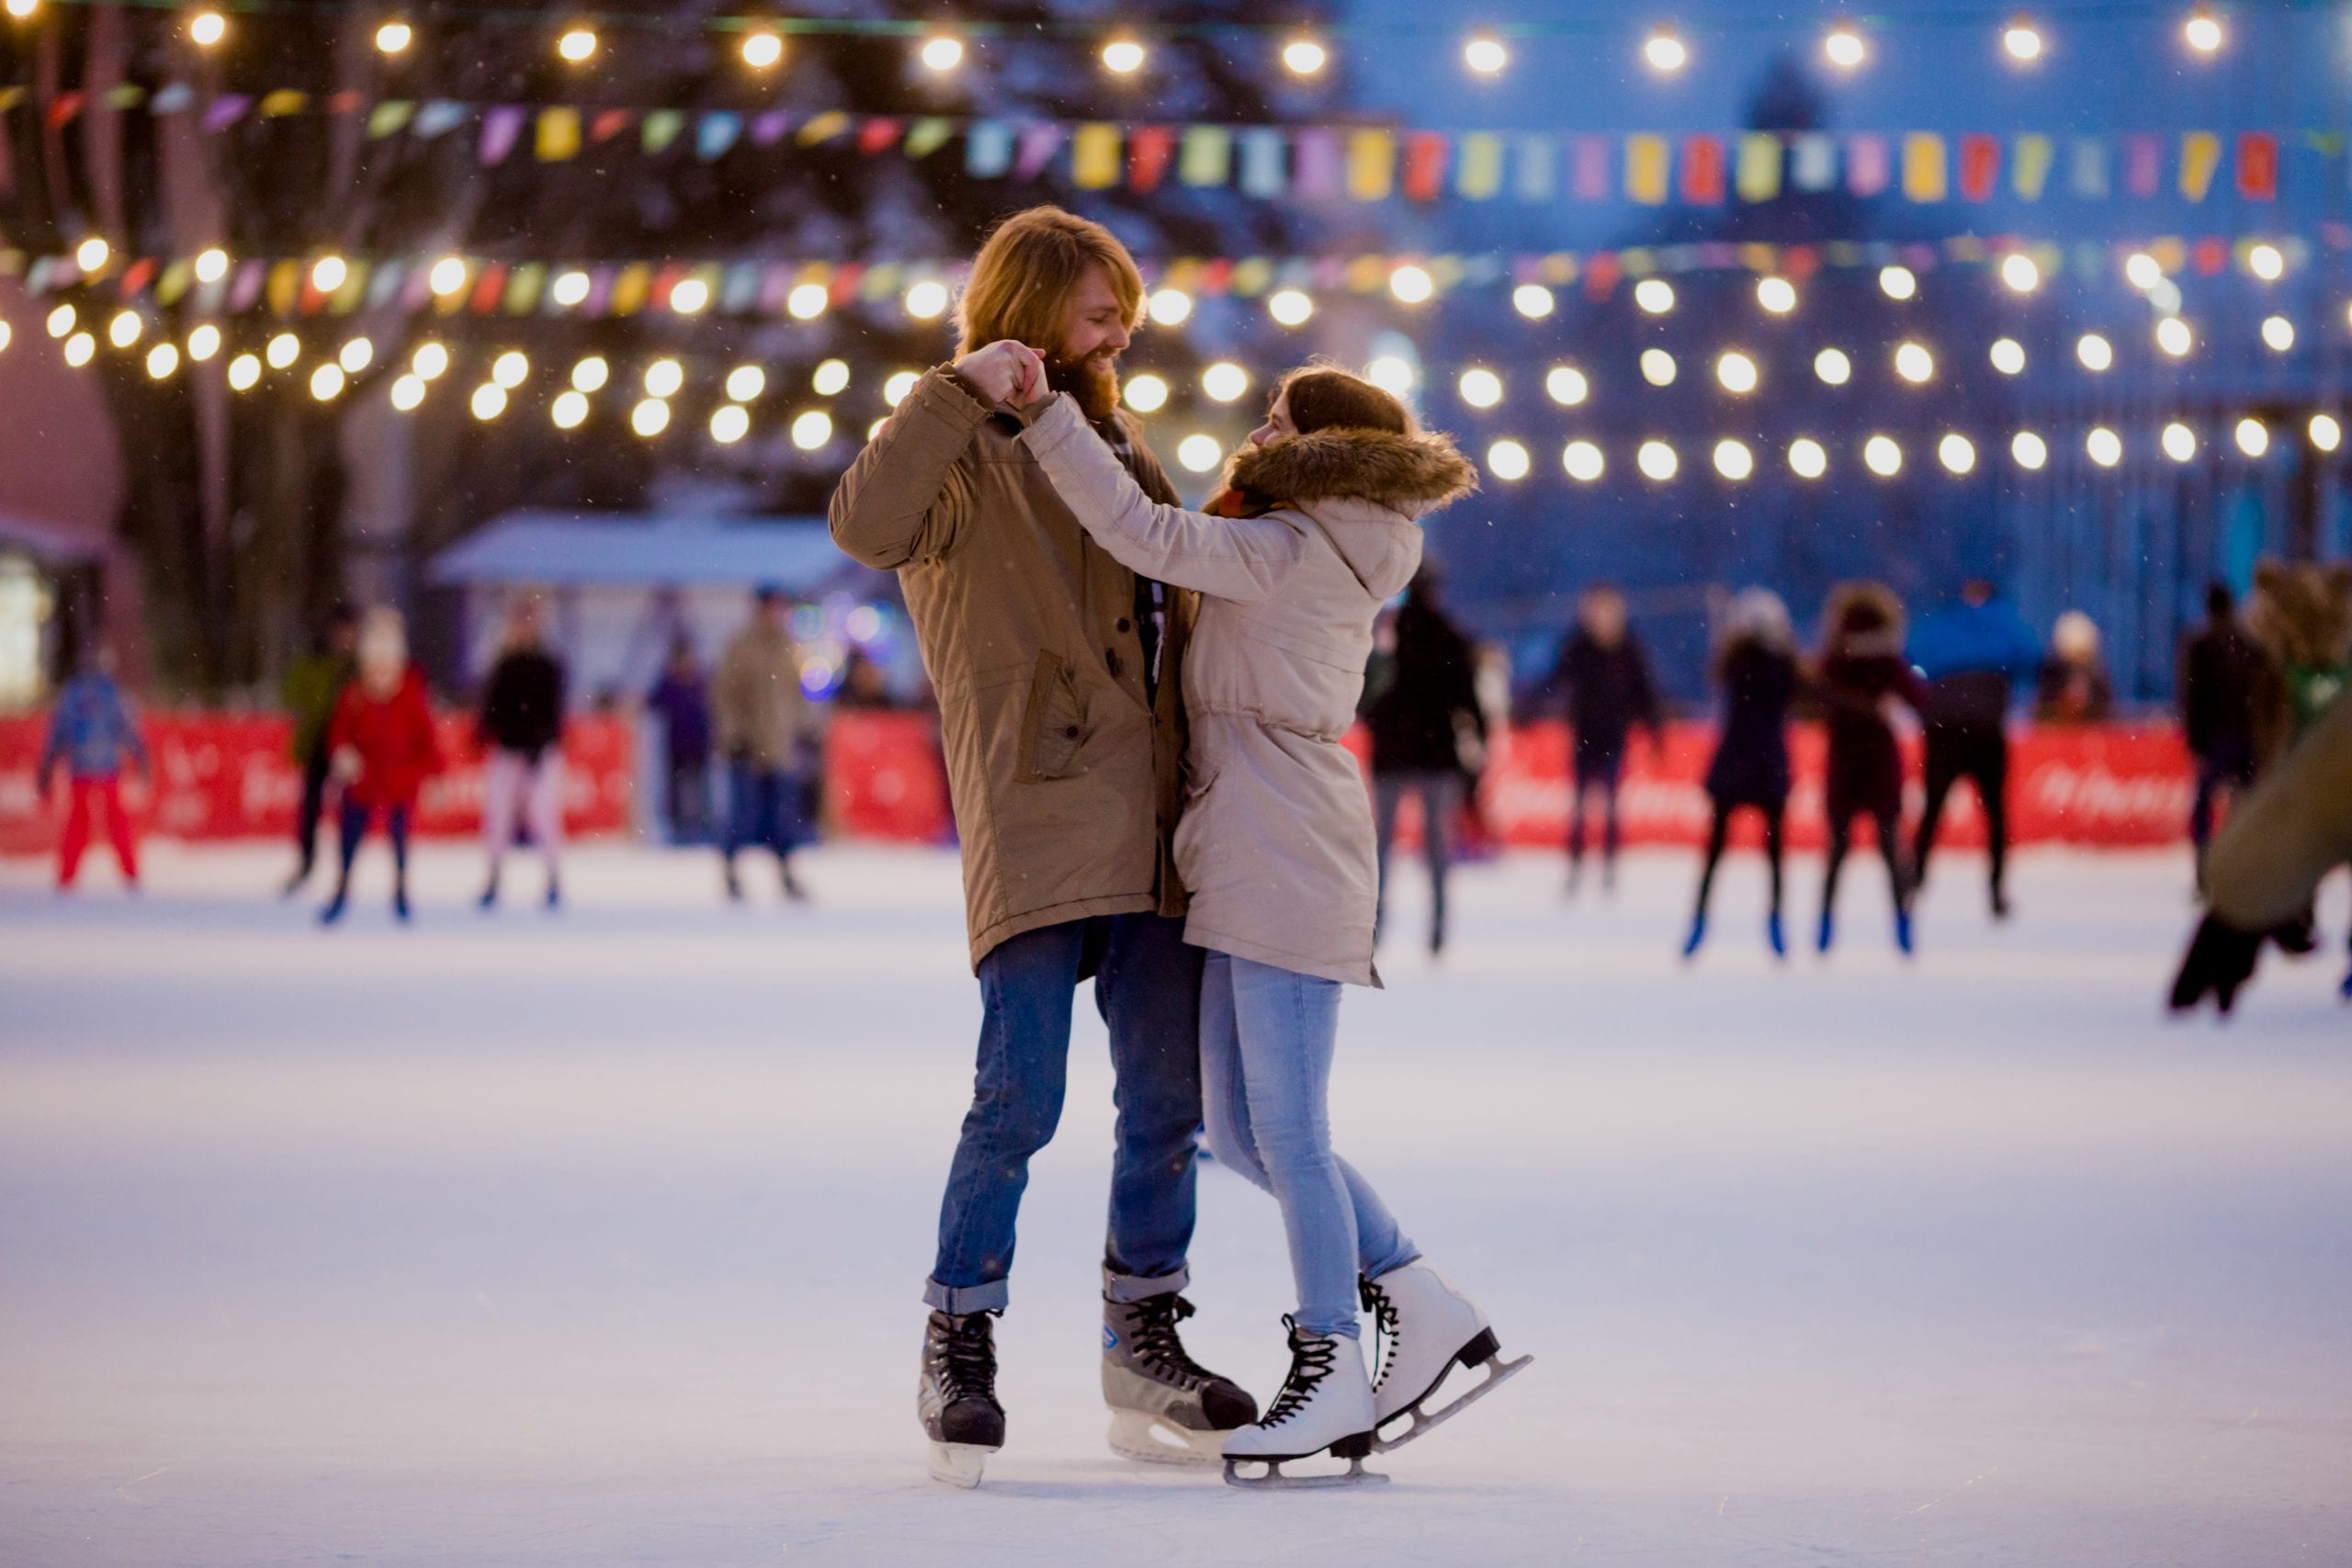 Indoor Ice Skating Rink Near NYC - Ice Rink Open All Year Round